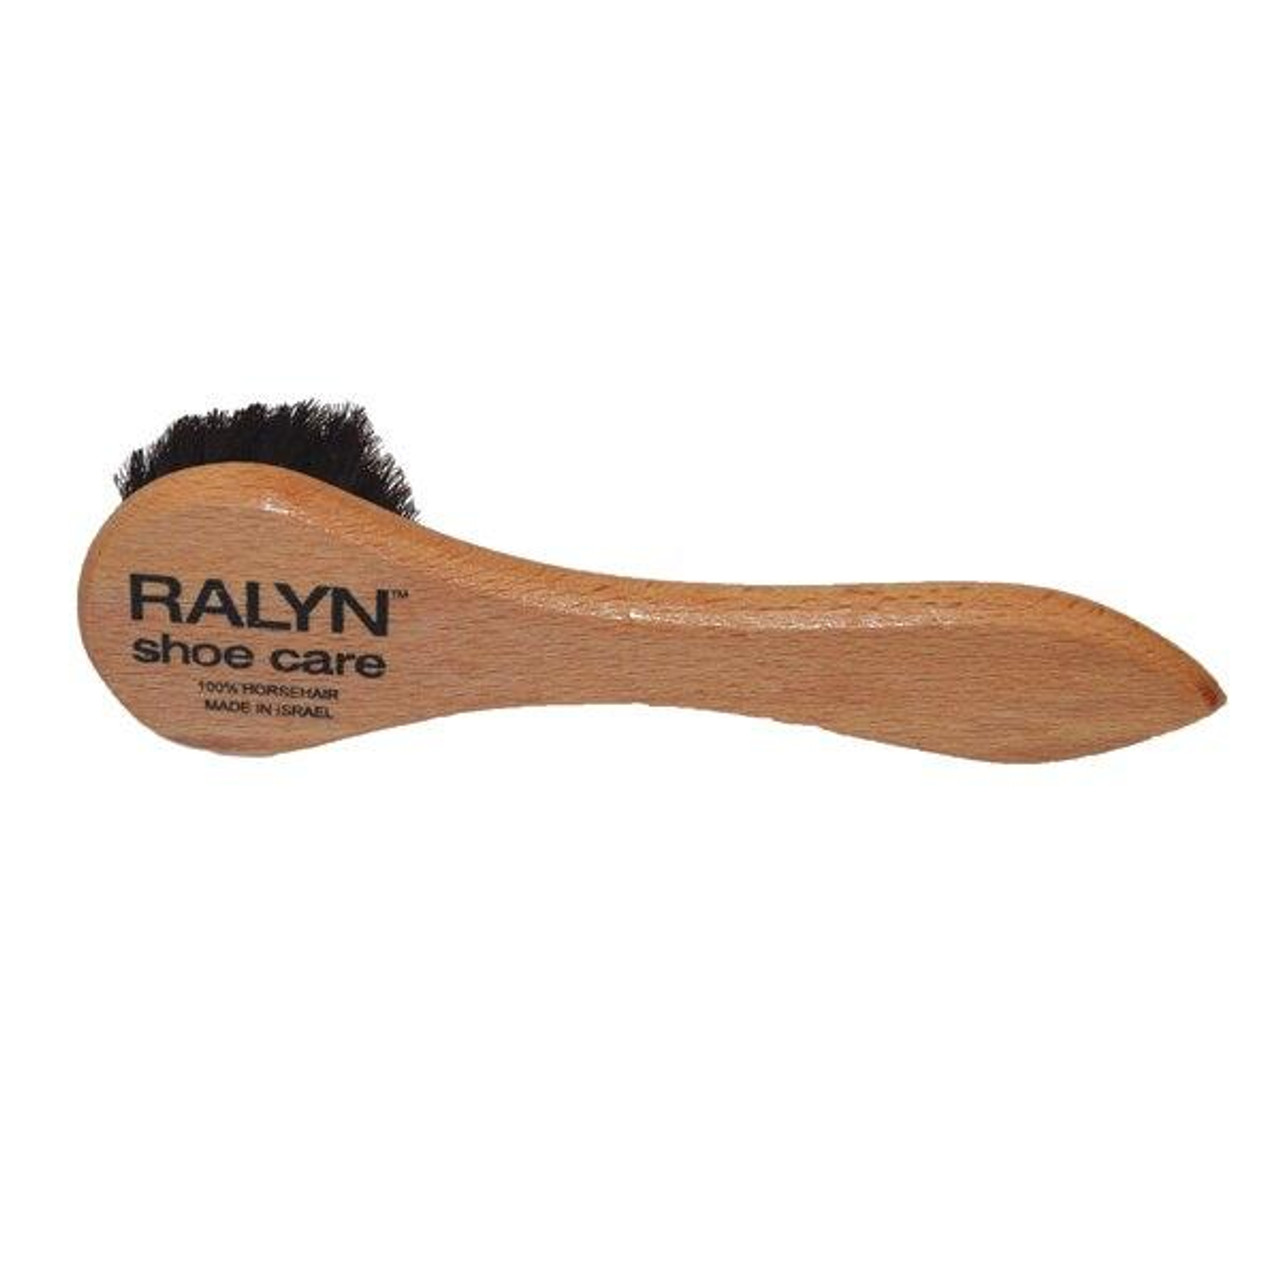 Professional Hole Punch - Ralyn Shoe Care